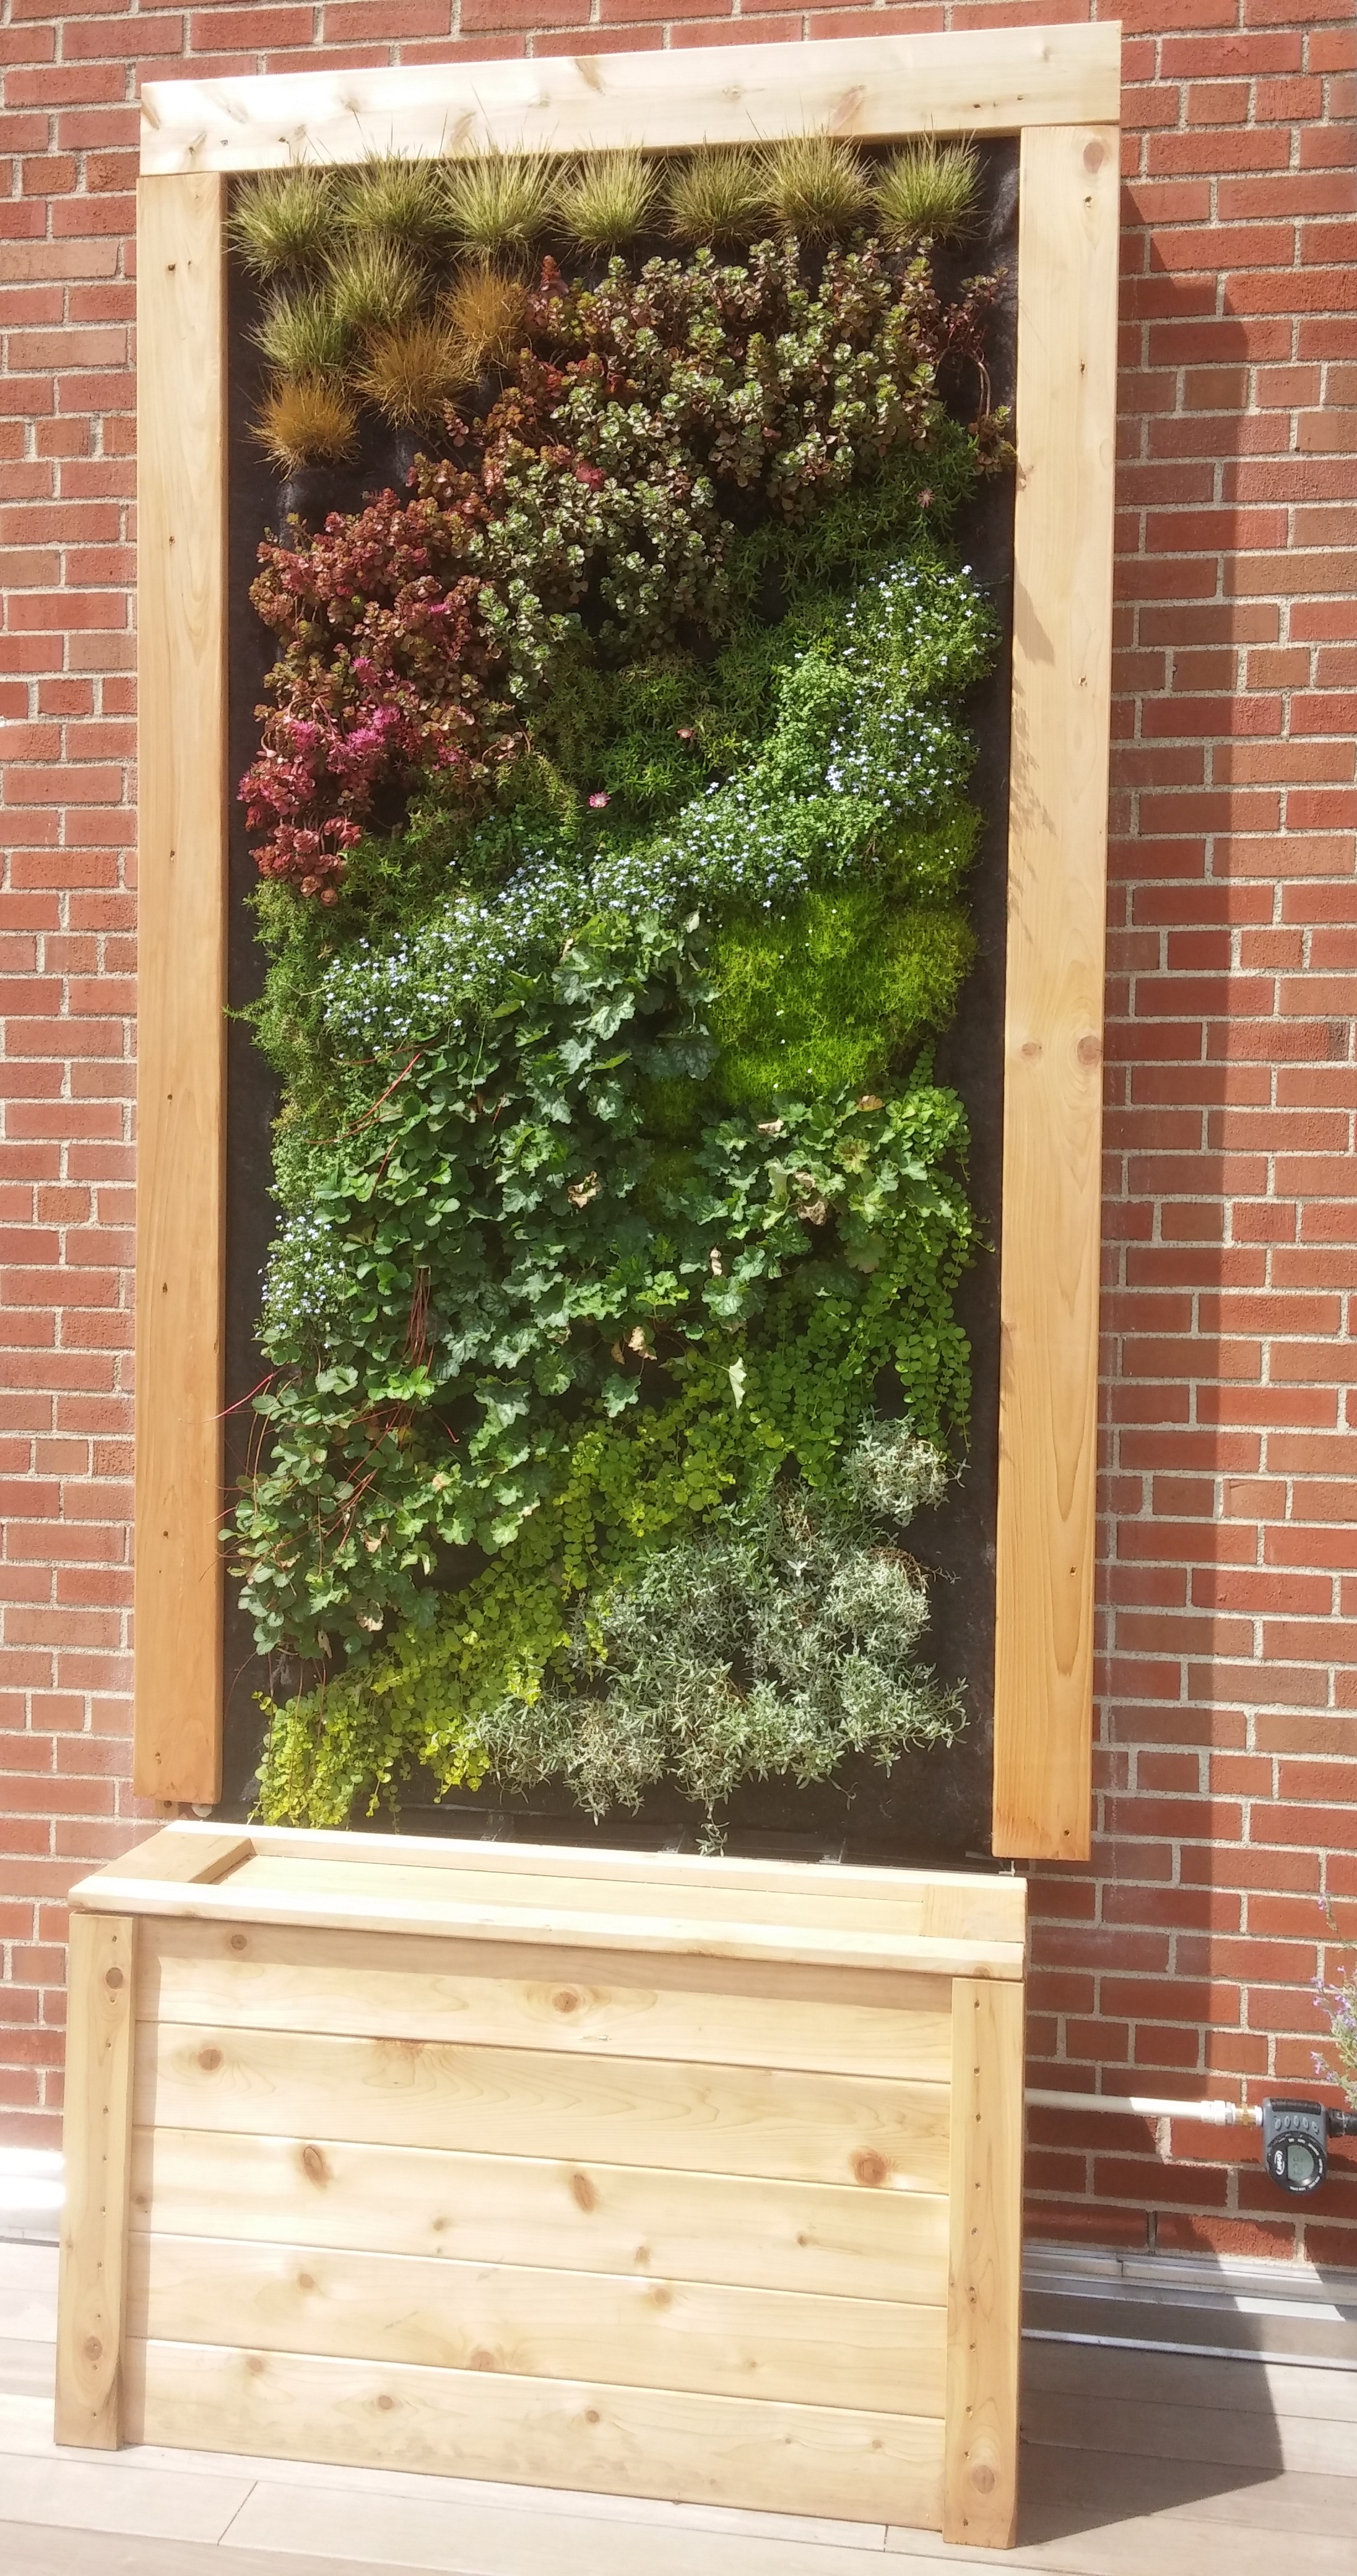 Coca Cola Sustainability Grant Past Winner - Green Wall Project